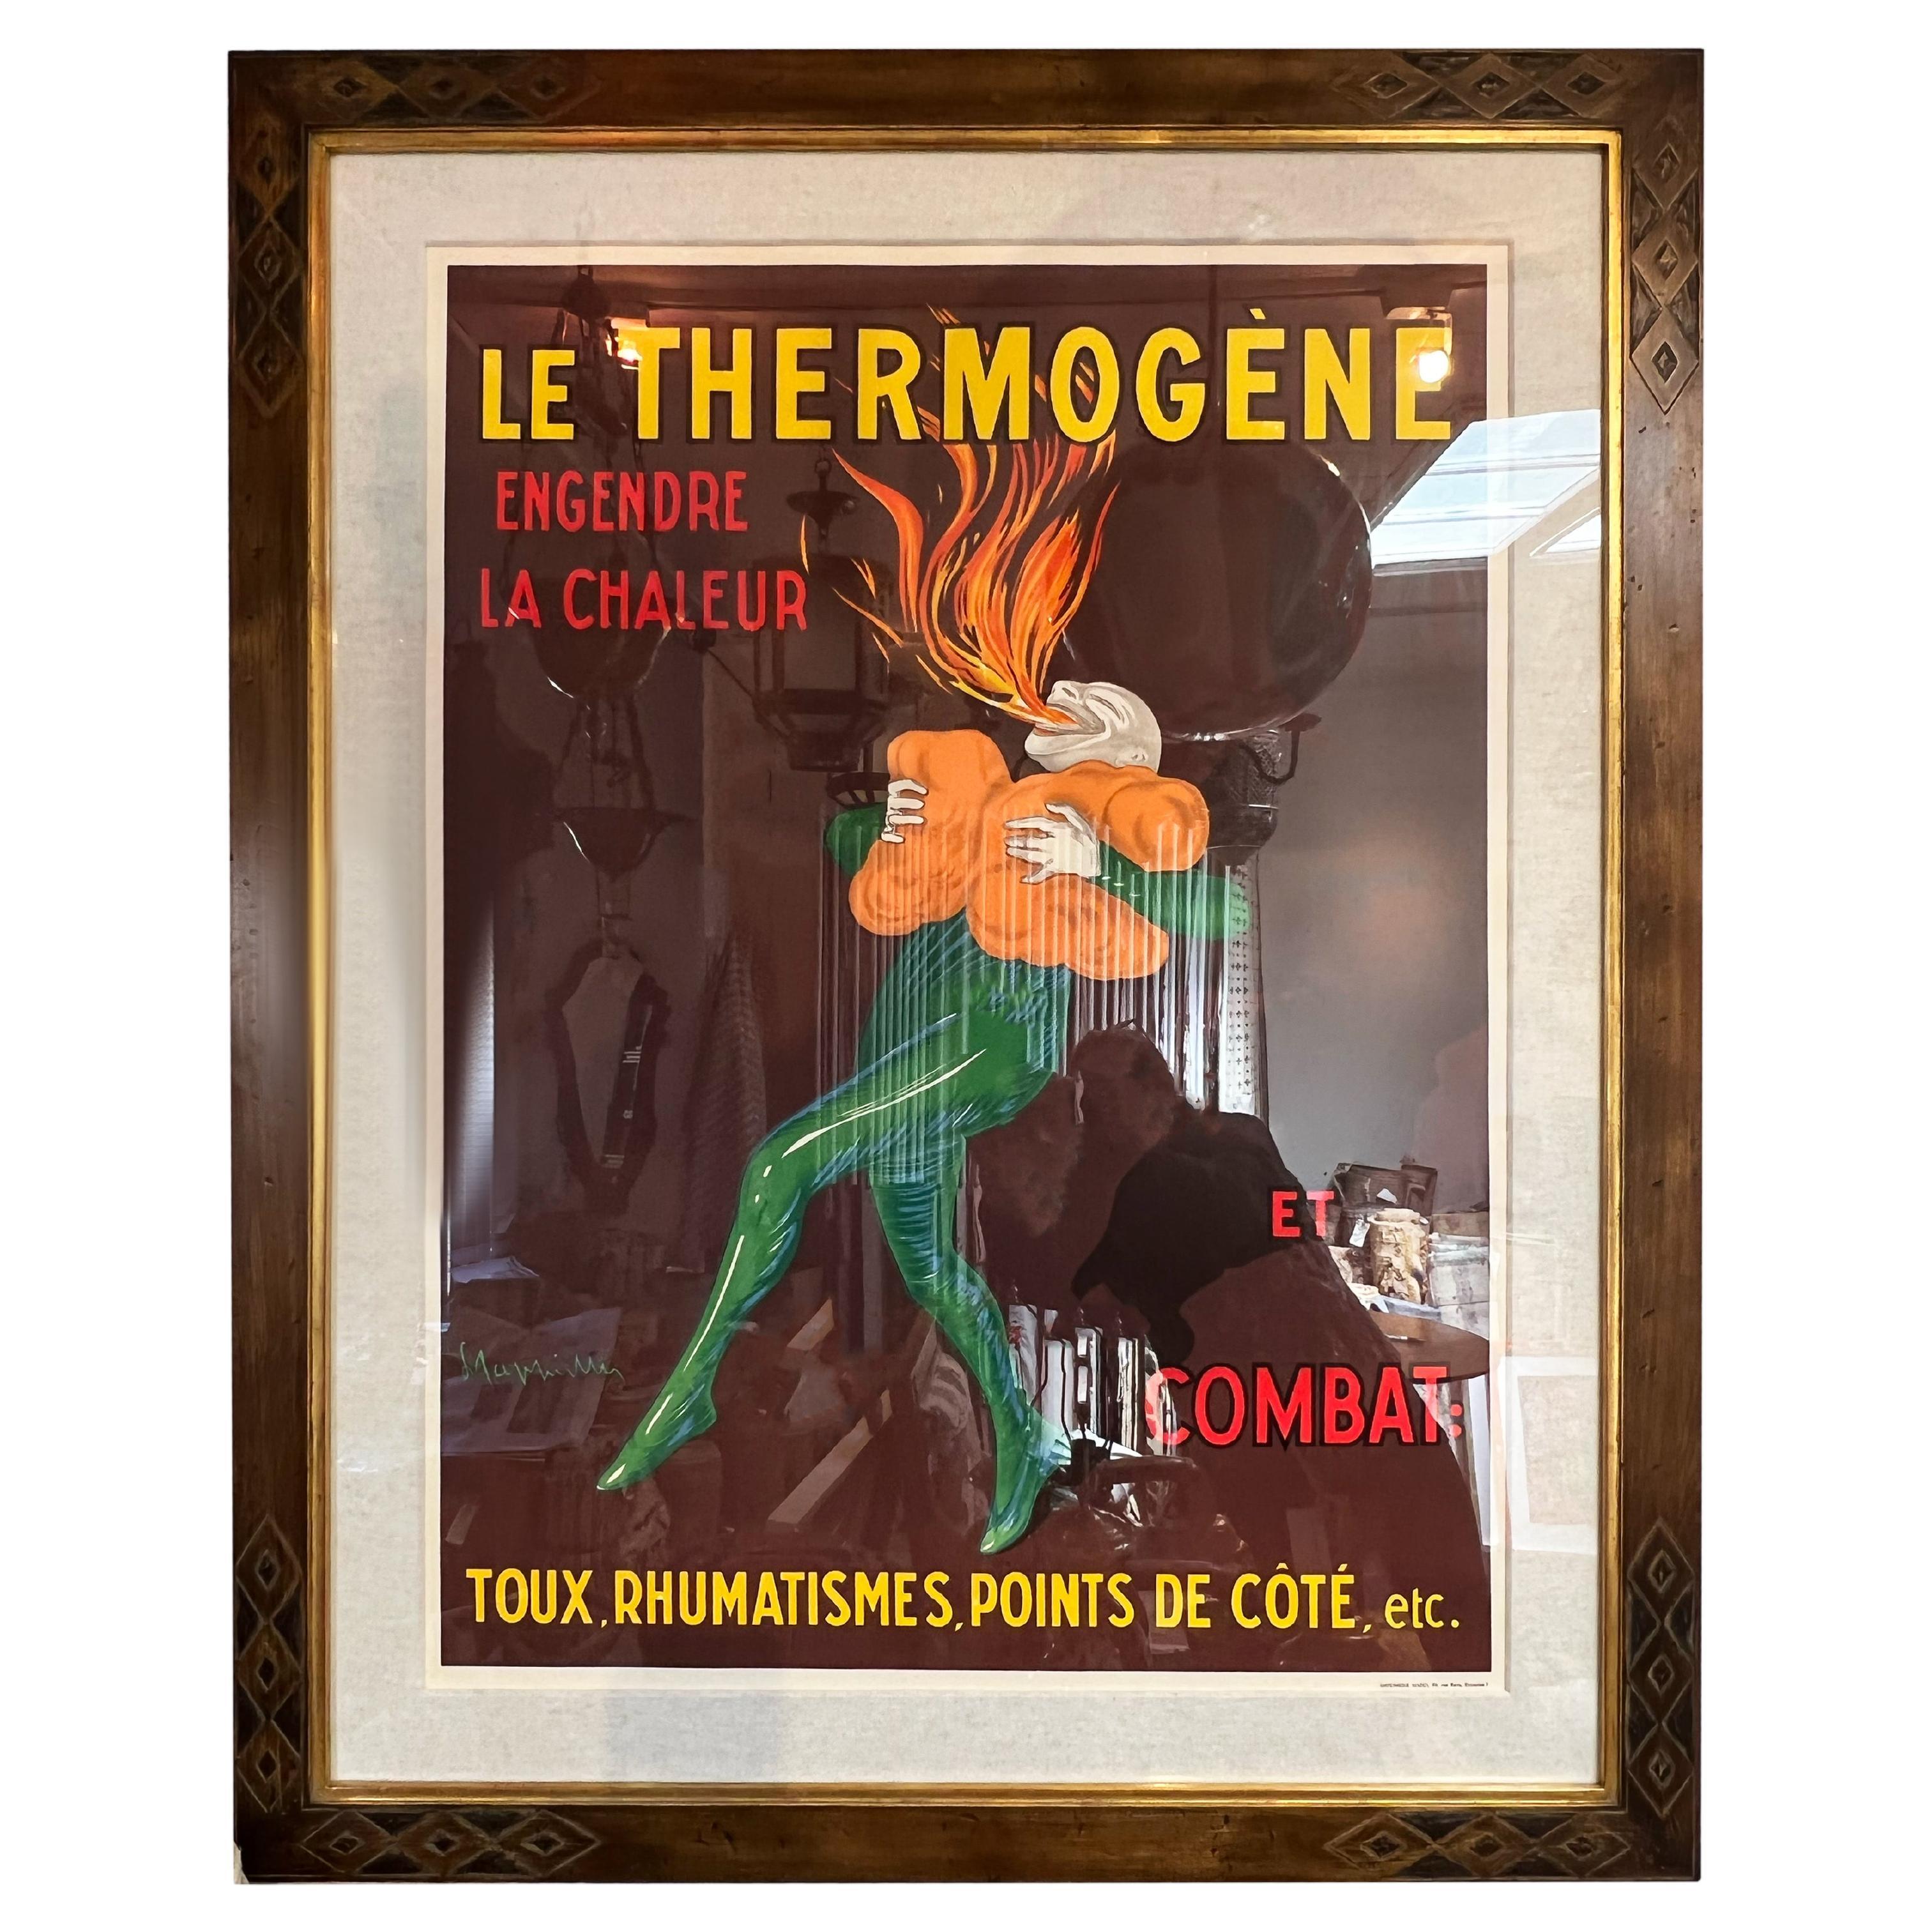 Framed, Original Vintage "Le Thermogene" Poster by Leonetto Cappiello For Sale